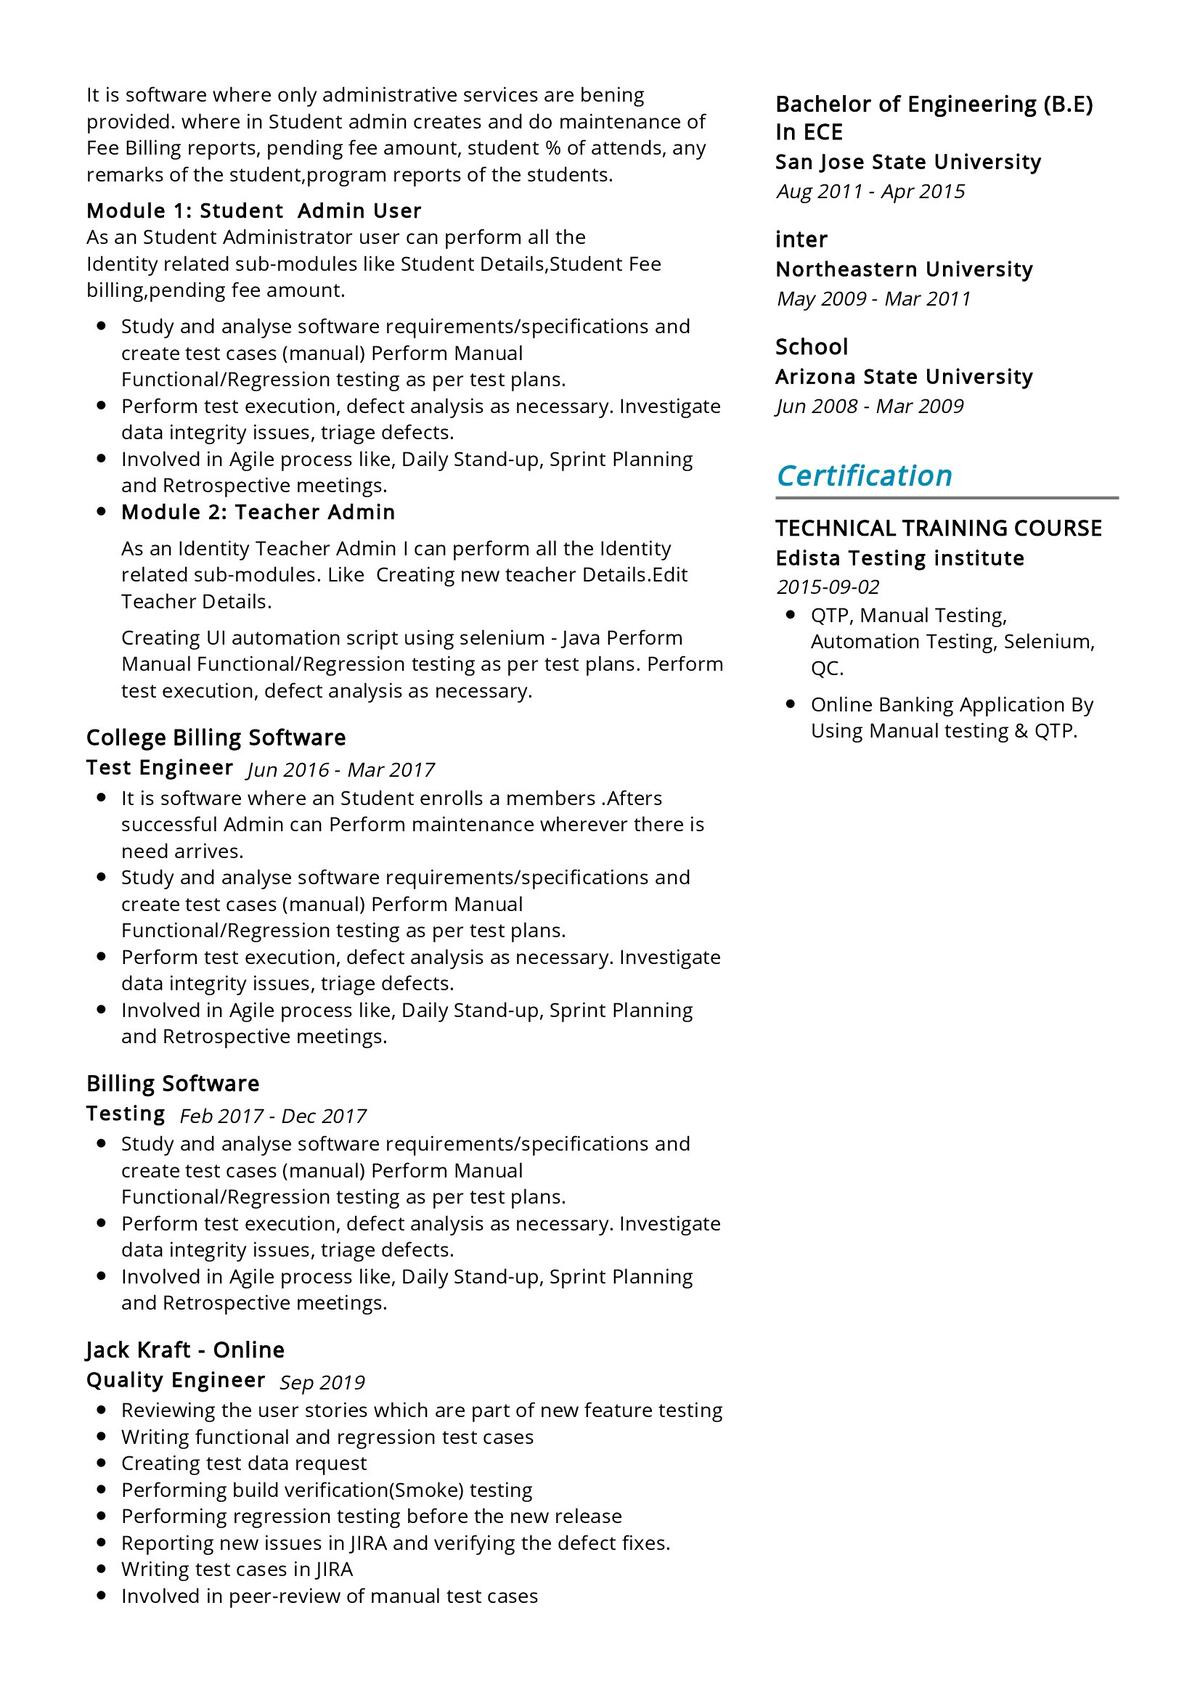 6 Months Experience Resume Sample In software Testing software Testing Resume Sample 2021 Writing Guide & Tips …